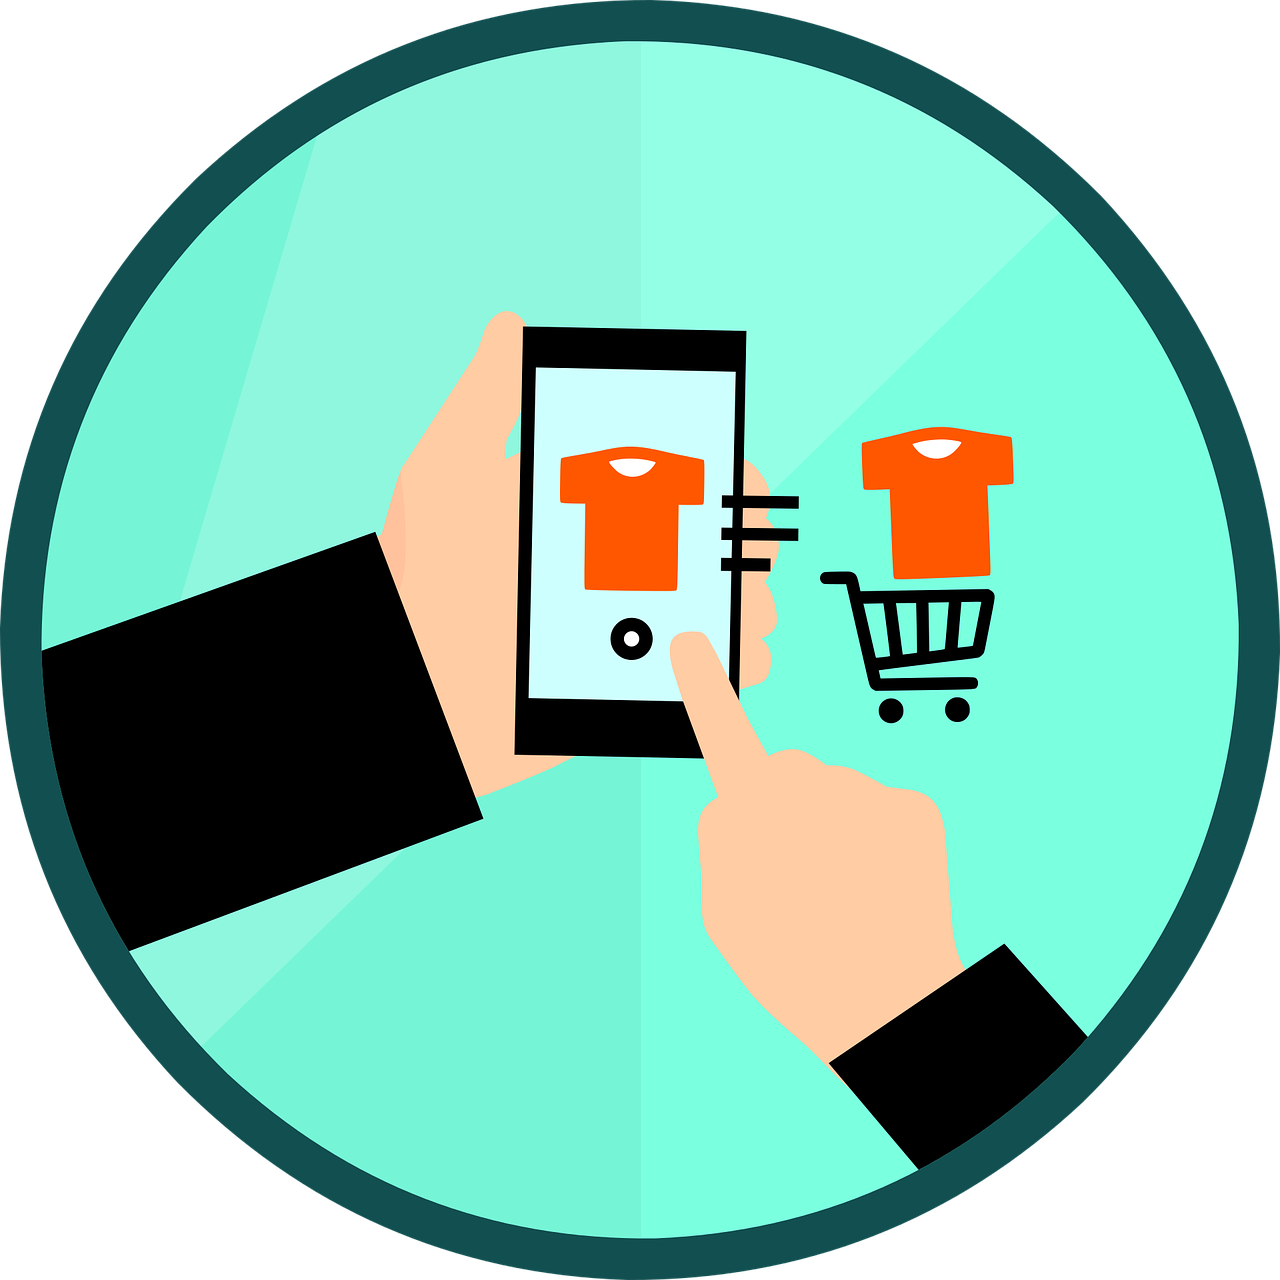 Image of shopping online right from a smartphone. Product Data Syndication makes it easy to get your products in front of the right people at the right time.